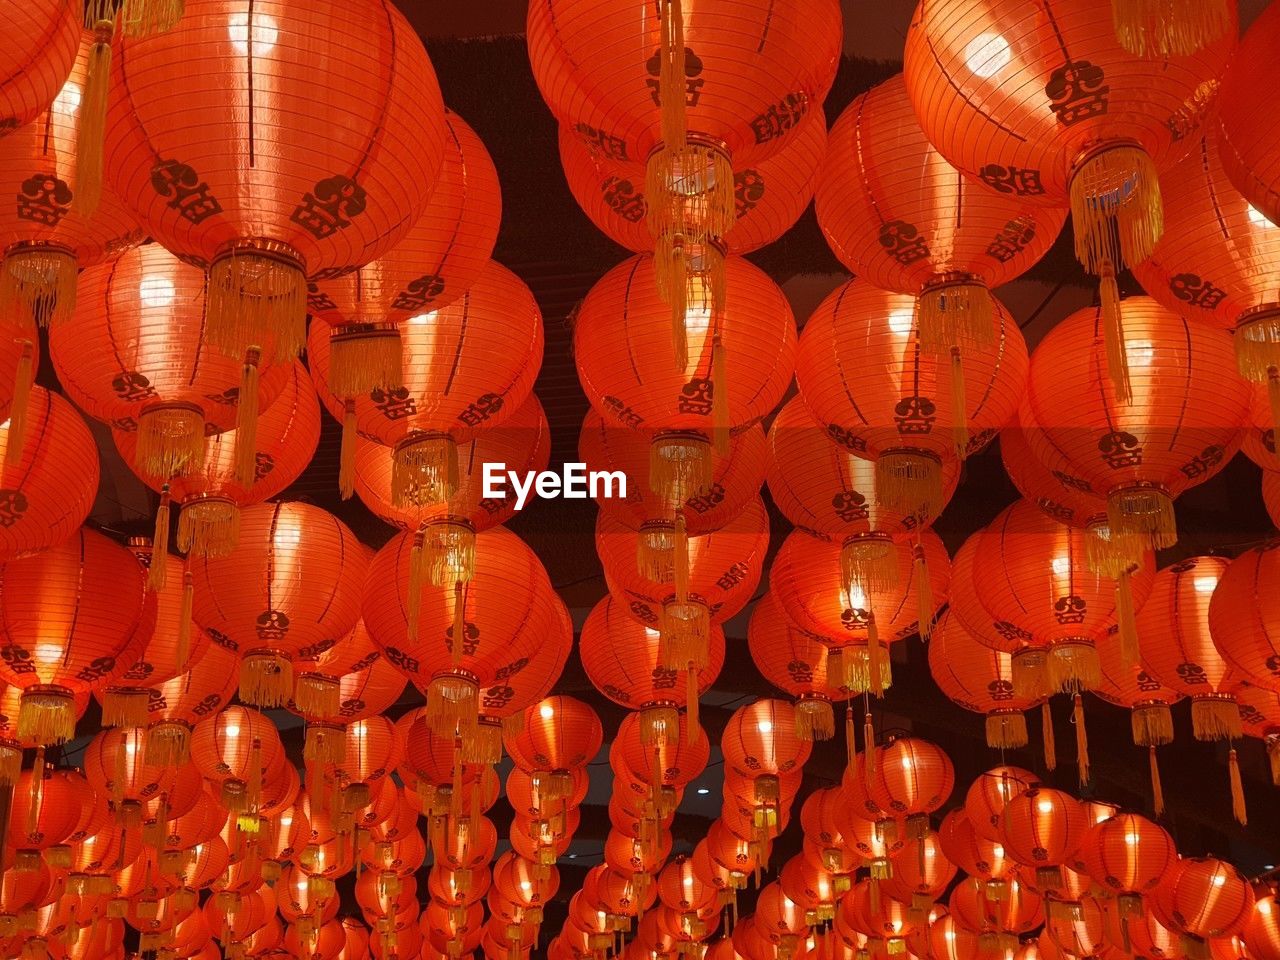 lantern, lighting equipment, chinese lantern, chinese lantern festival, chinese new year, hanging, festival, celebration, traditional festival, large group of objects, tradition, illuminated, event, decoration, repetition, in a row, red, holiday, no people, abundance, low angle view, night, orange, lighting, paper lantern